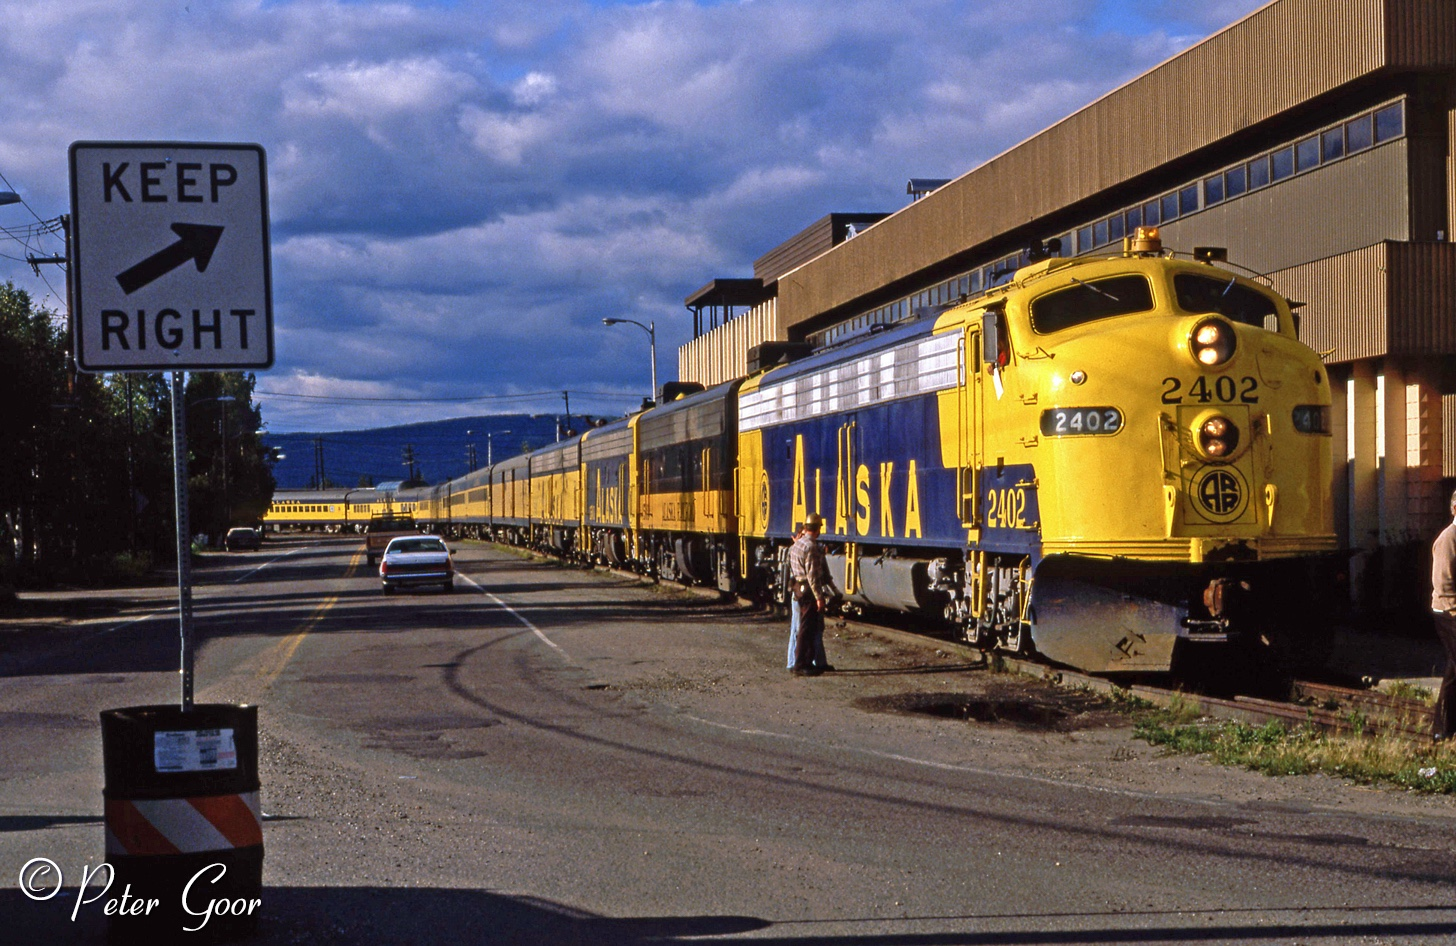 Since I am tinkering on an HO scale E-9 I thought I might post a picture I took in 1984 after getting off the northbound train. We took it at Denali station.